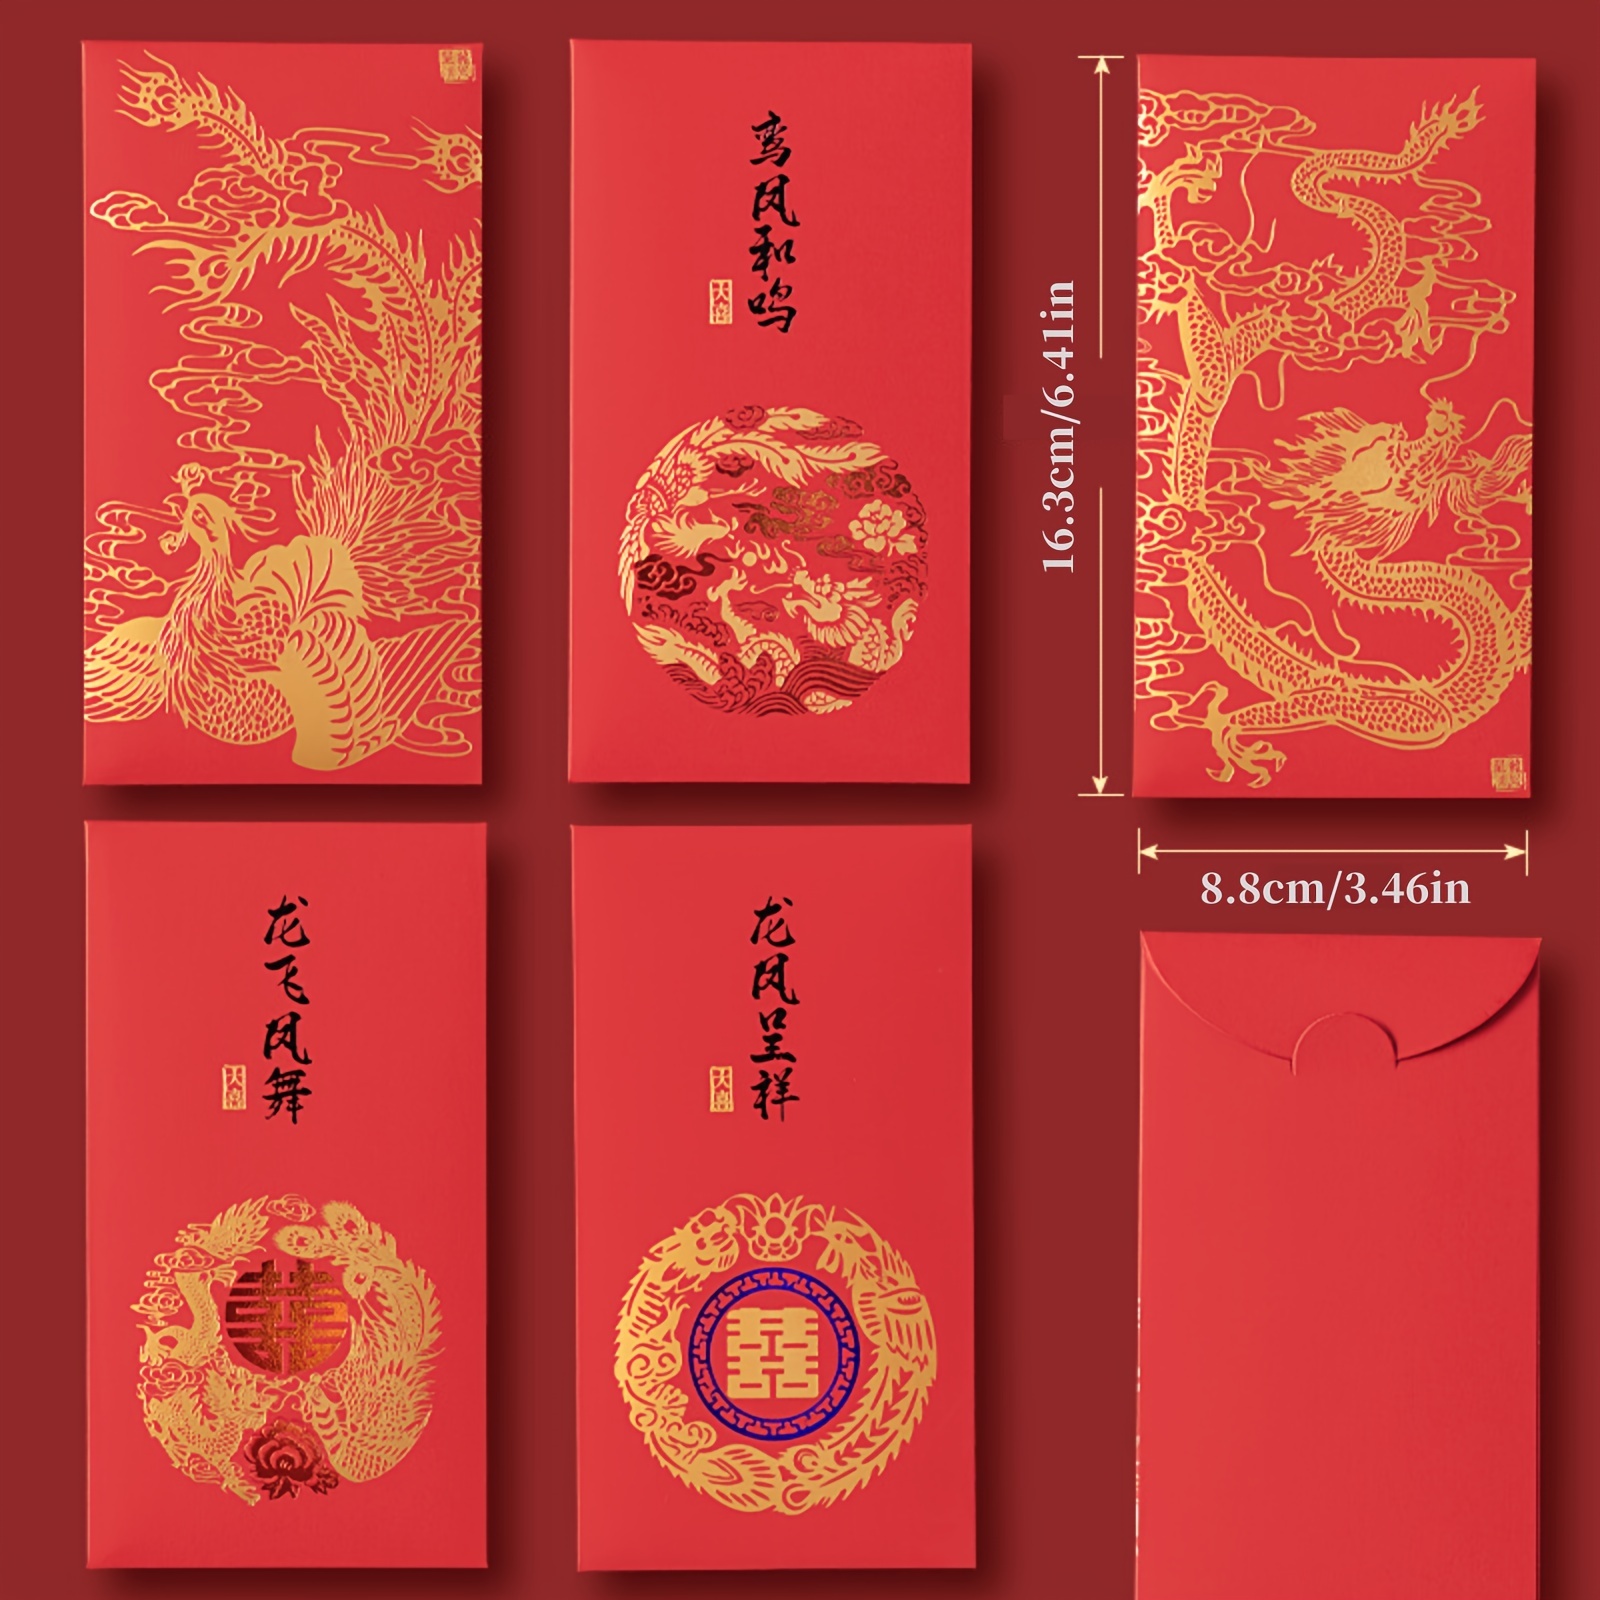 46 Red Packet Designs ideas  red packet, red pocket, red envelope